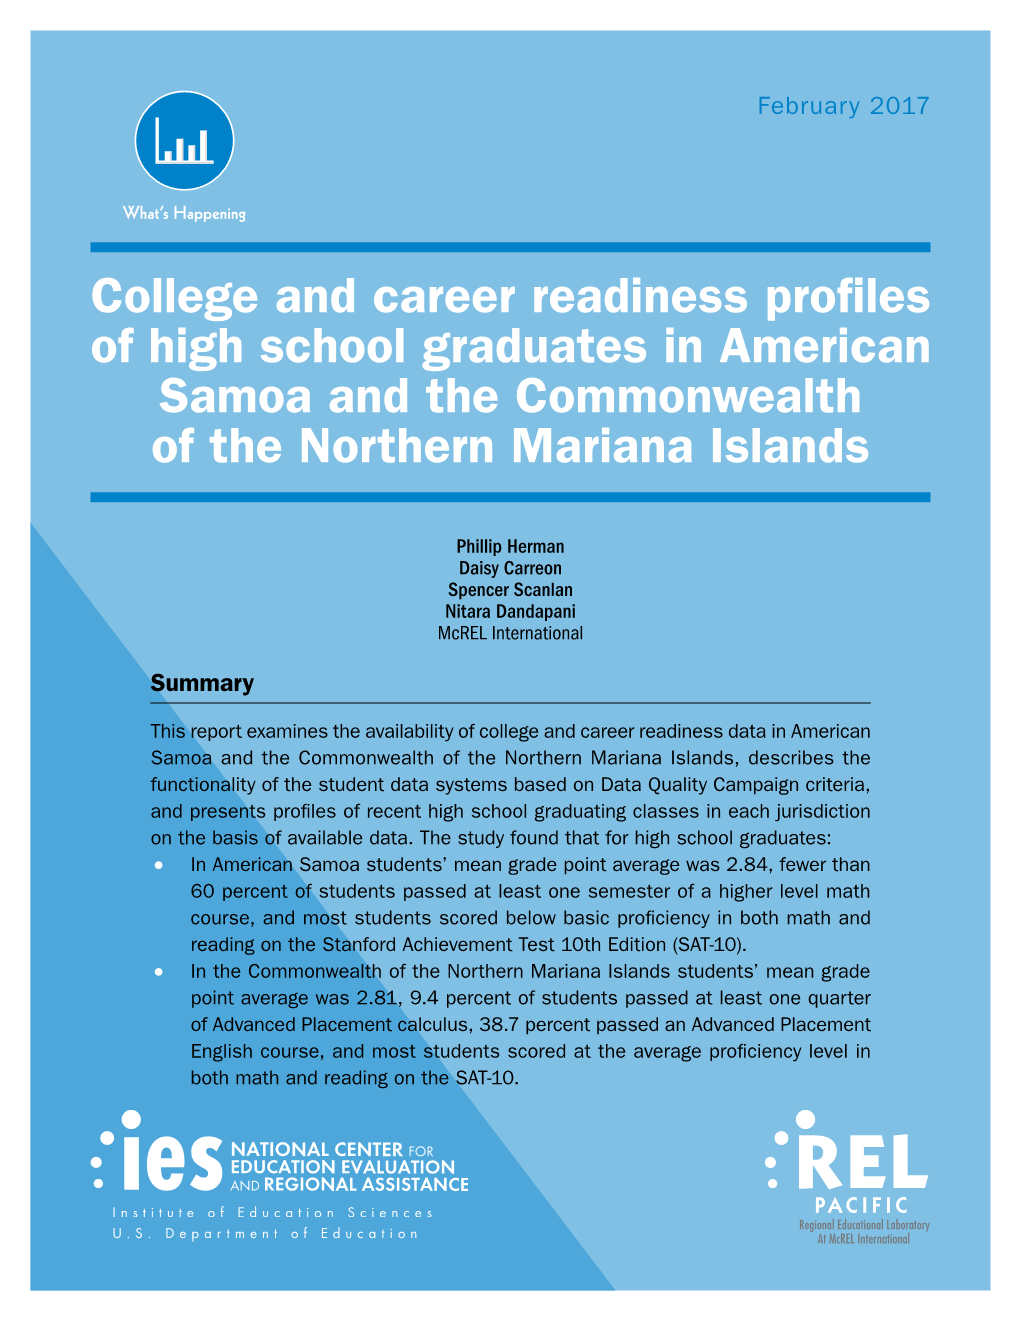 College and Career Readiness Profiles of High School Graduates in American Samoa and the Commonwealth of the Northern Mariana Islands